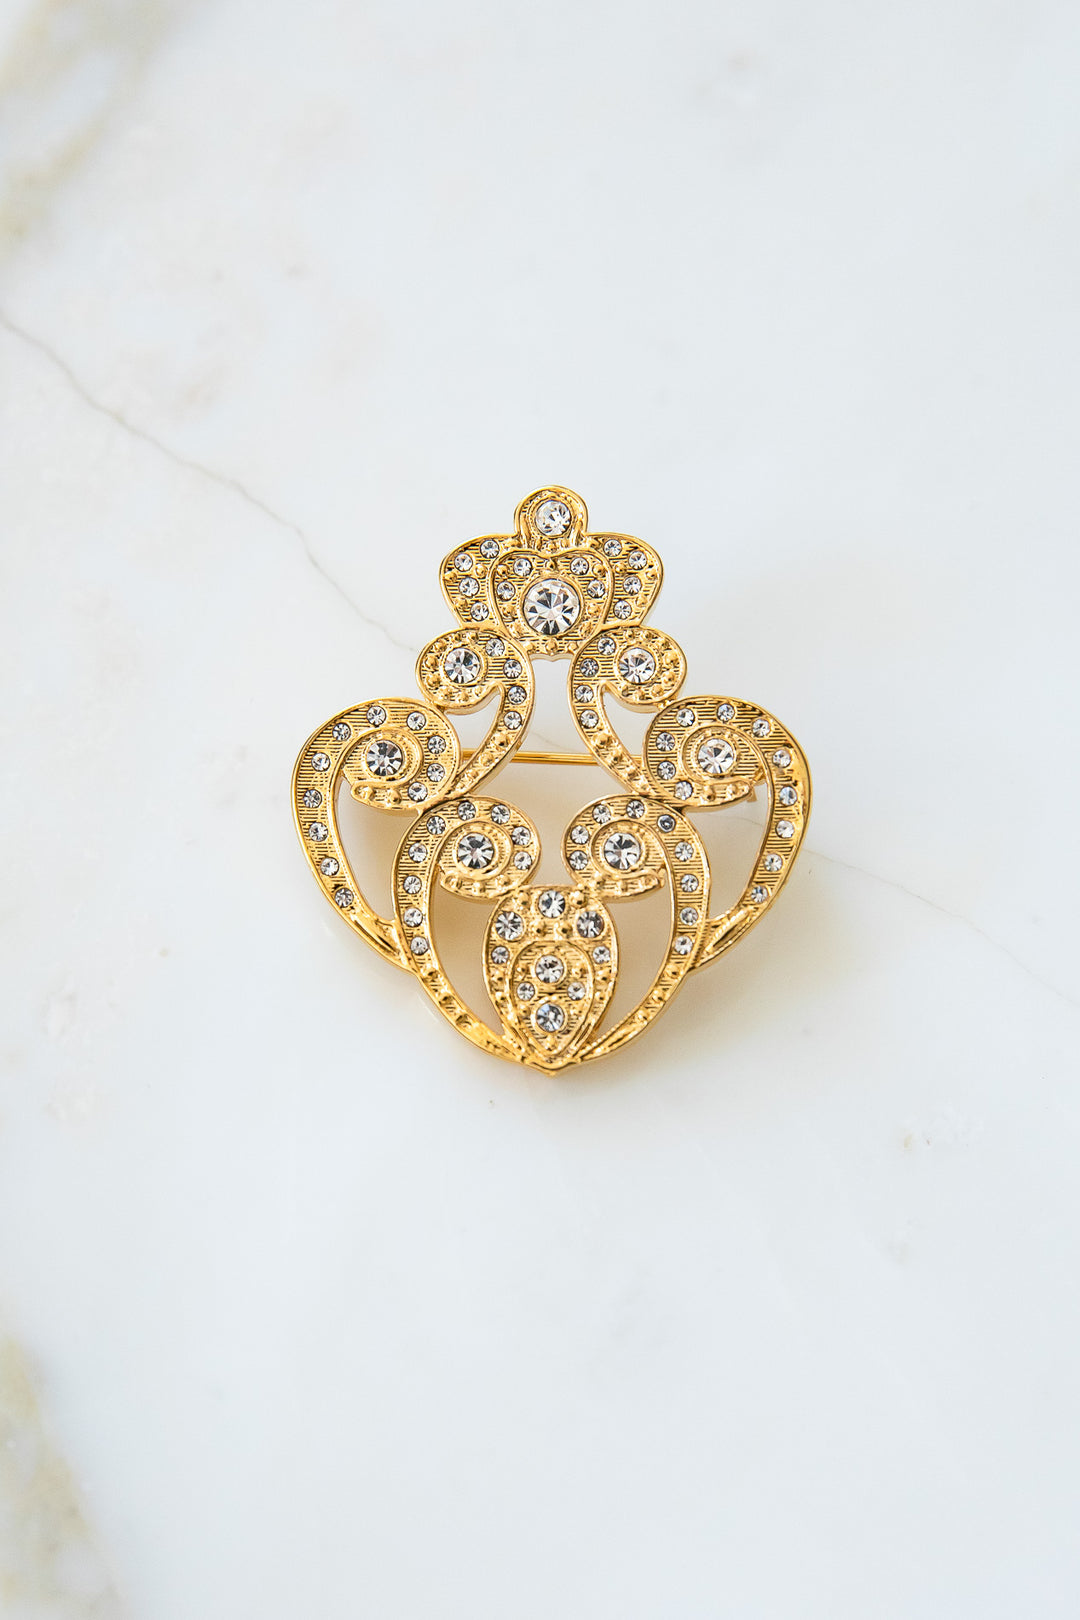 The Crown Brooch - Gold With White Crystals